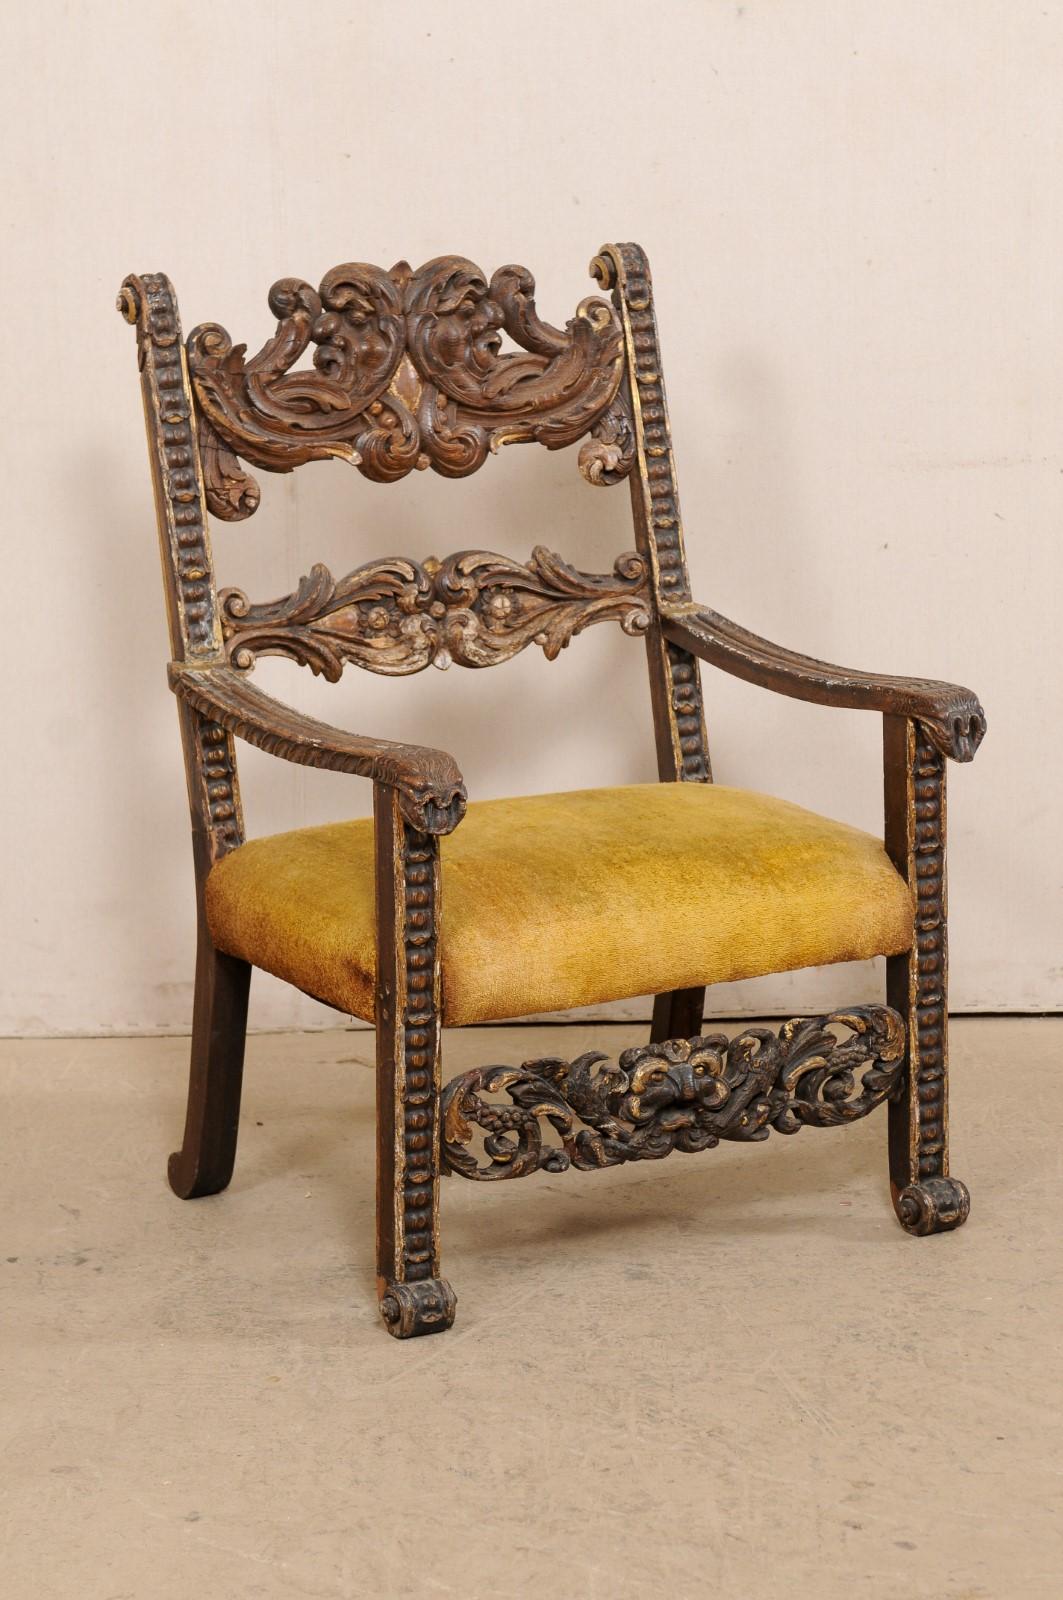 An Italian carved-wood Baroque armchair from the 18th century, possibly older. This antique chair from Italy has meticulous hand-carvings throughout, with particular emphasis along it's back-splat rests and front stretcher in an acanthus leaf motif.